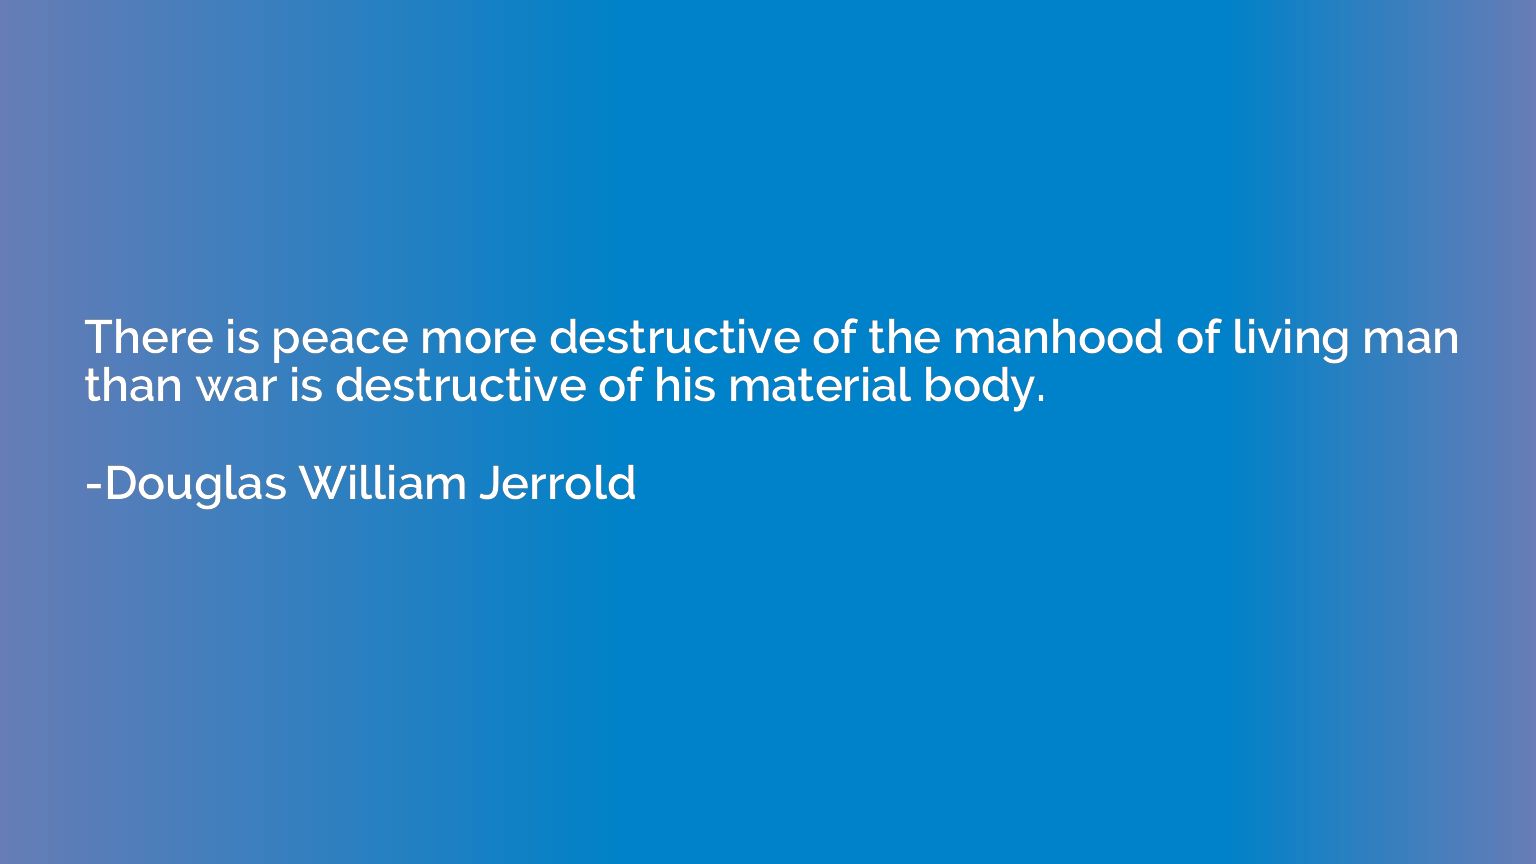 There is peace more destructive of the manhood of living man